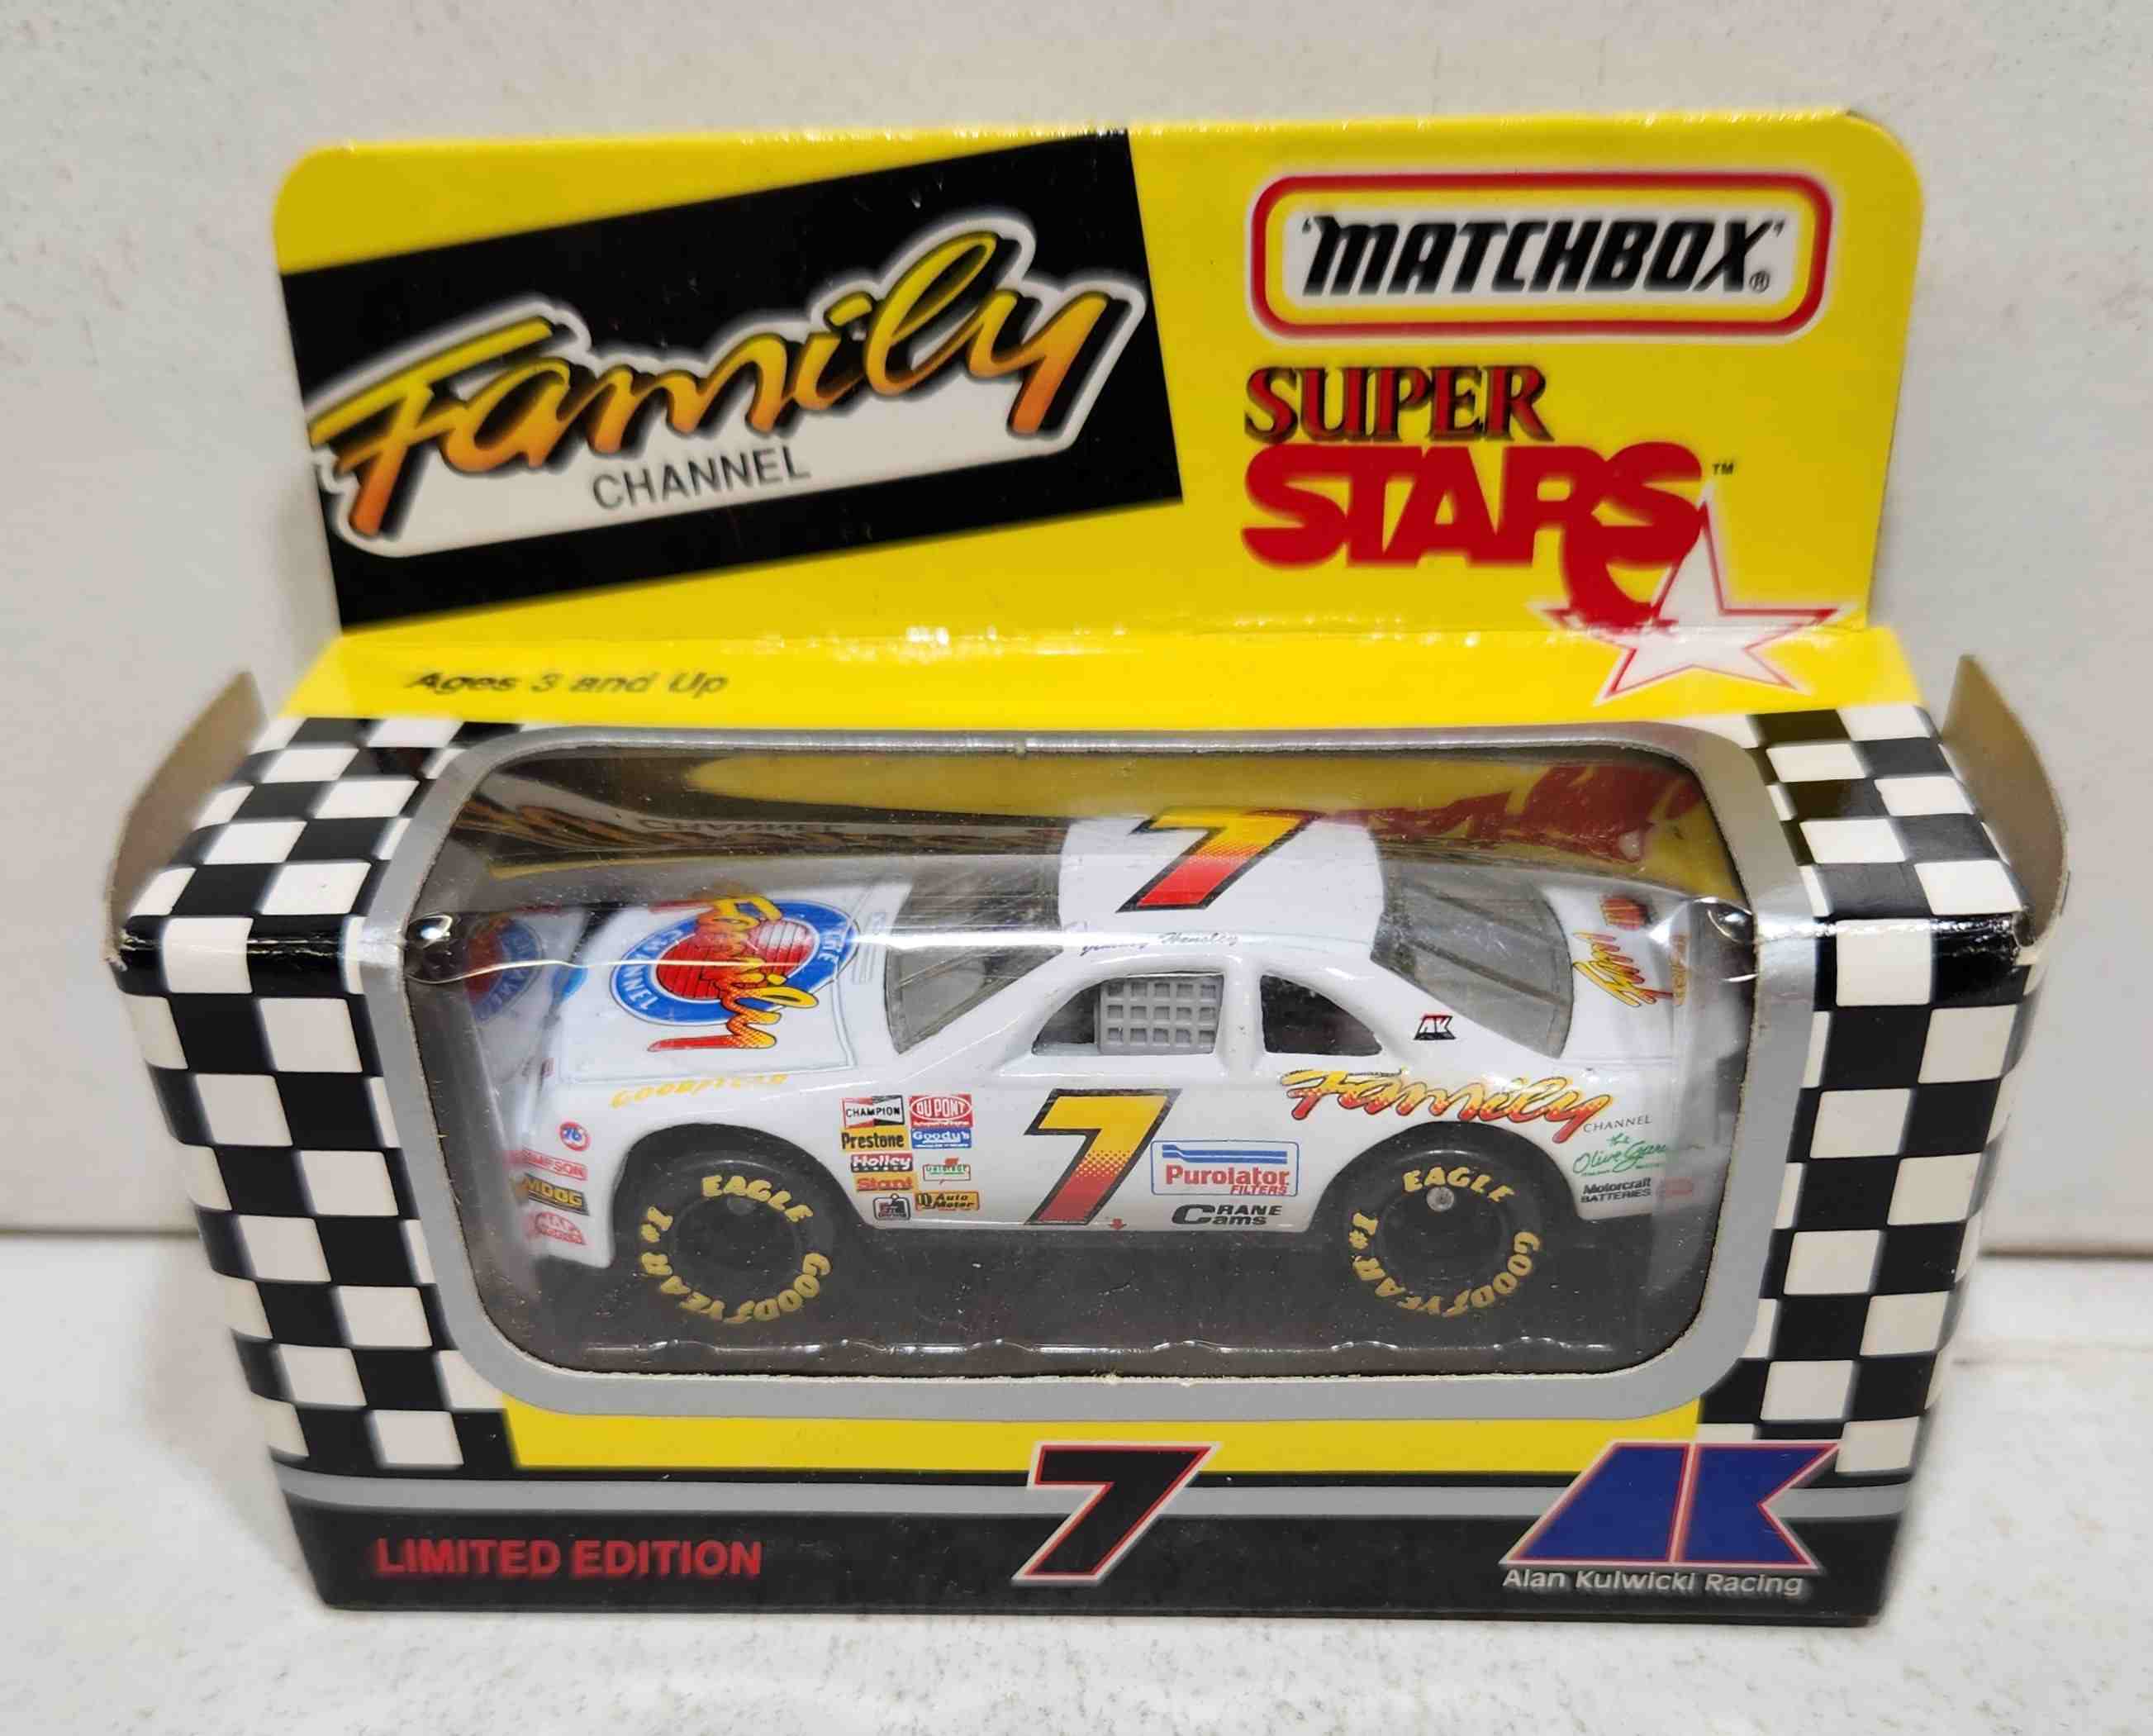 1993 Jimmy Hensley 1/64th Family Channel Thunderbird